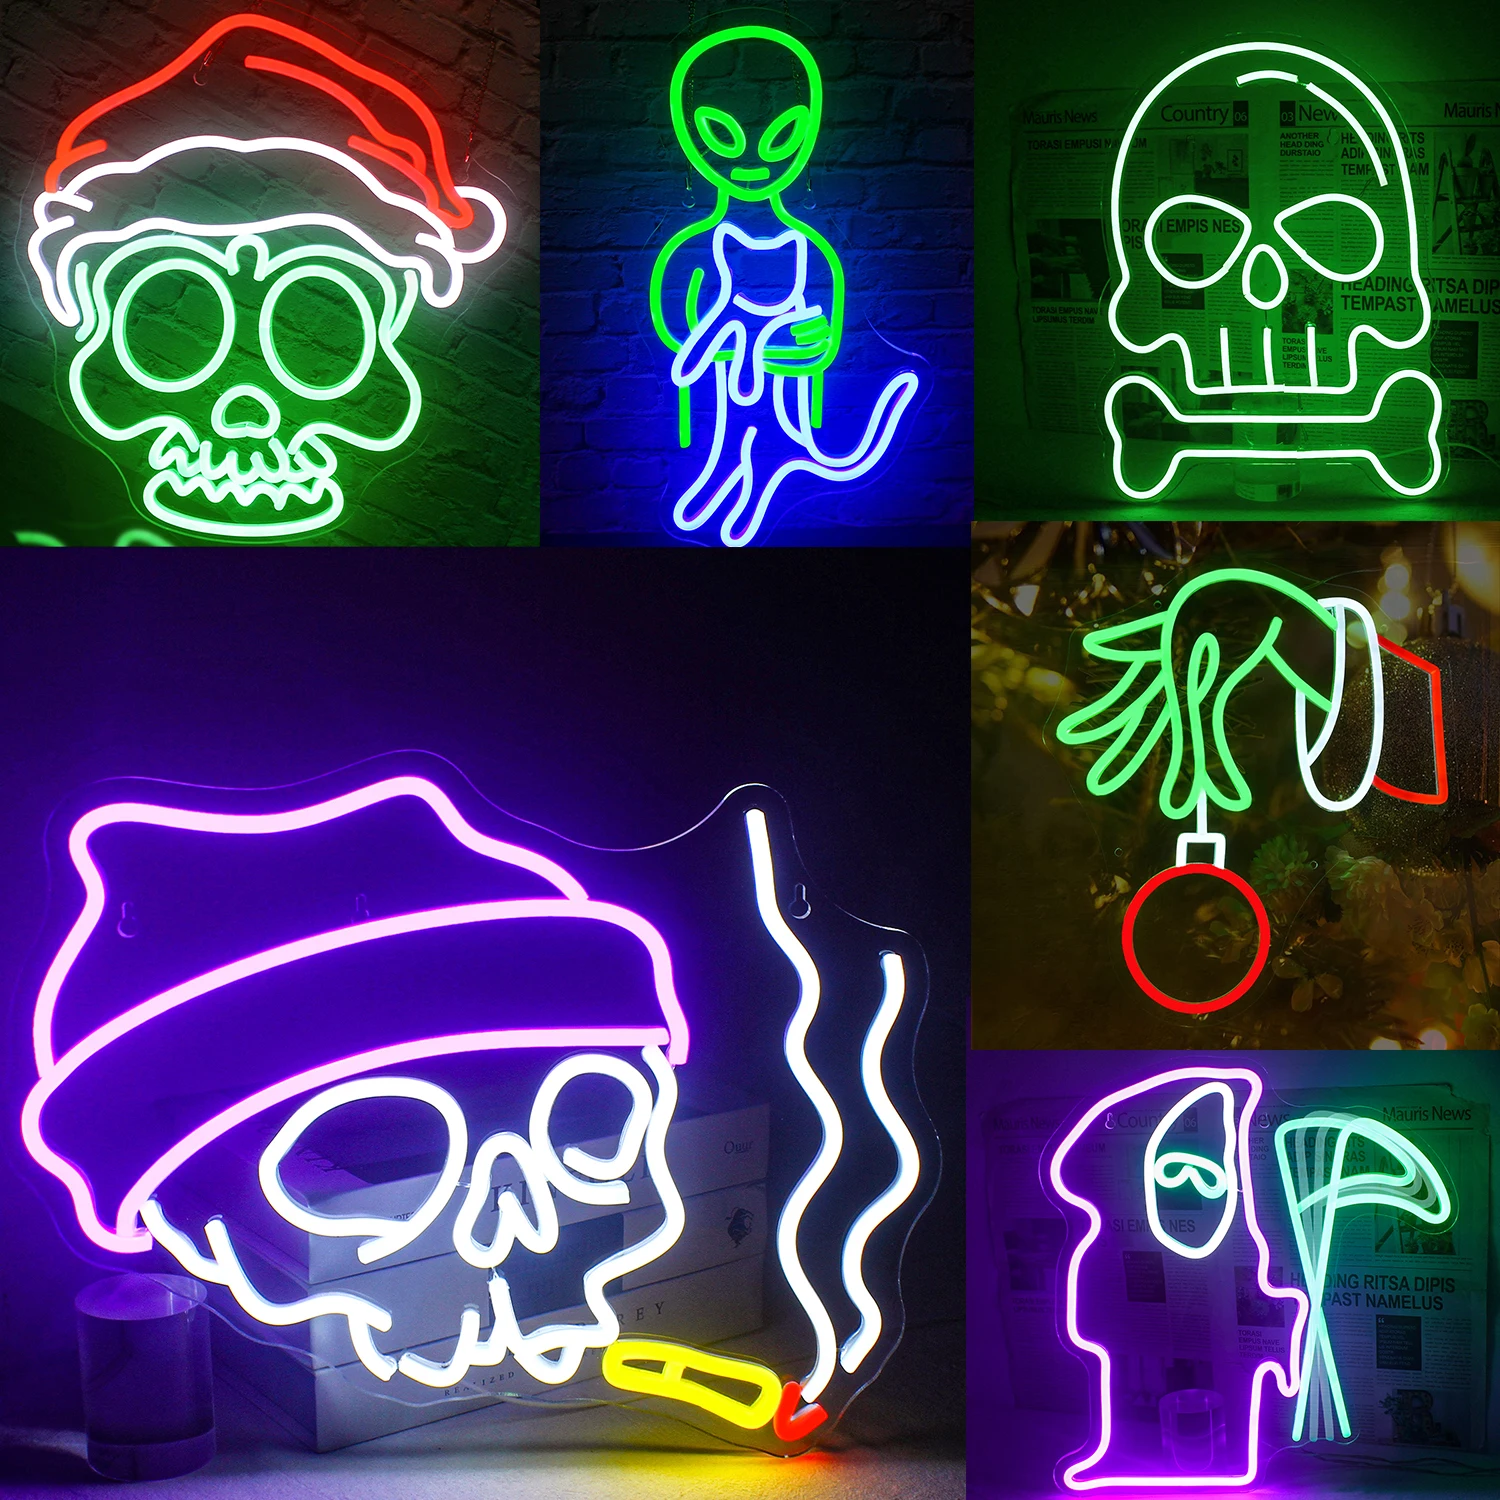 

Christmas Halloween Neon Sign Bedroom Christmas Party neon Lights Personalized Home Bar Pub Club Decor Wall Fun Atmosphere Light